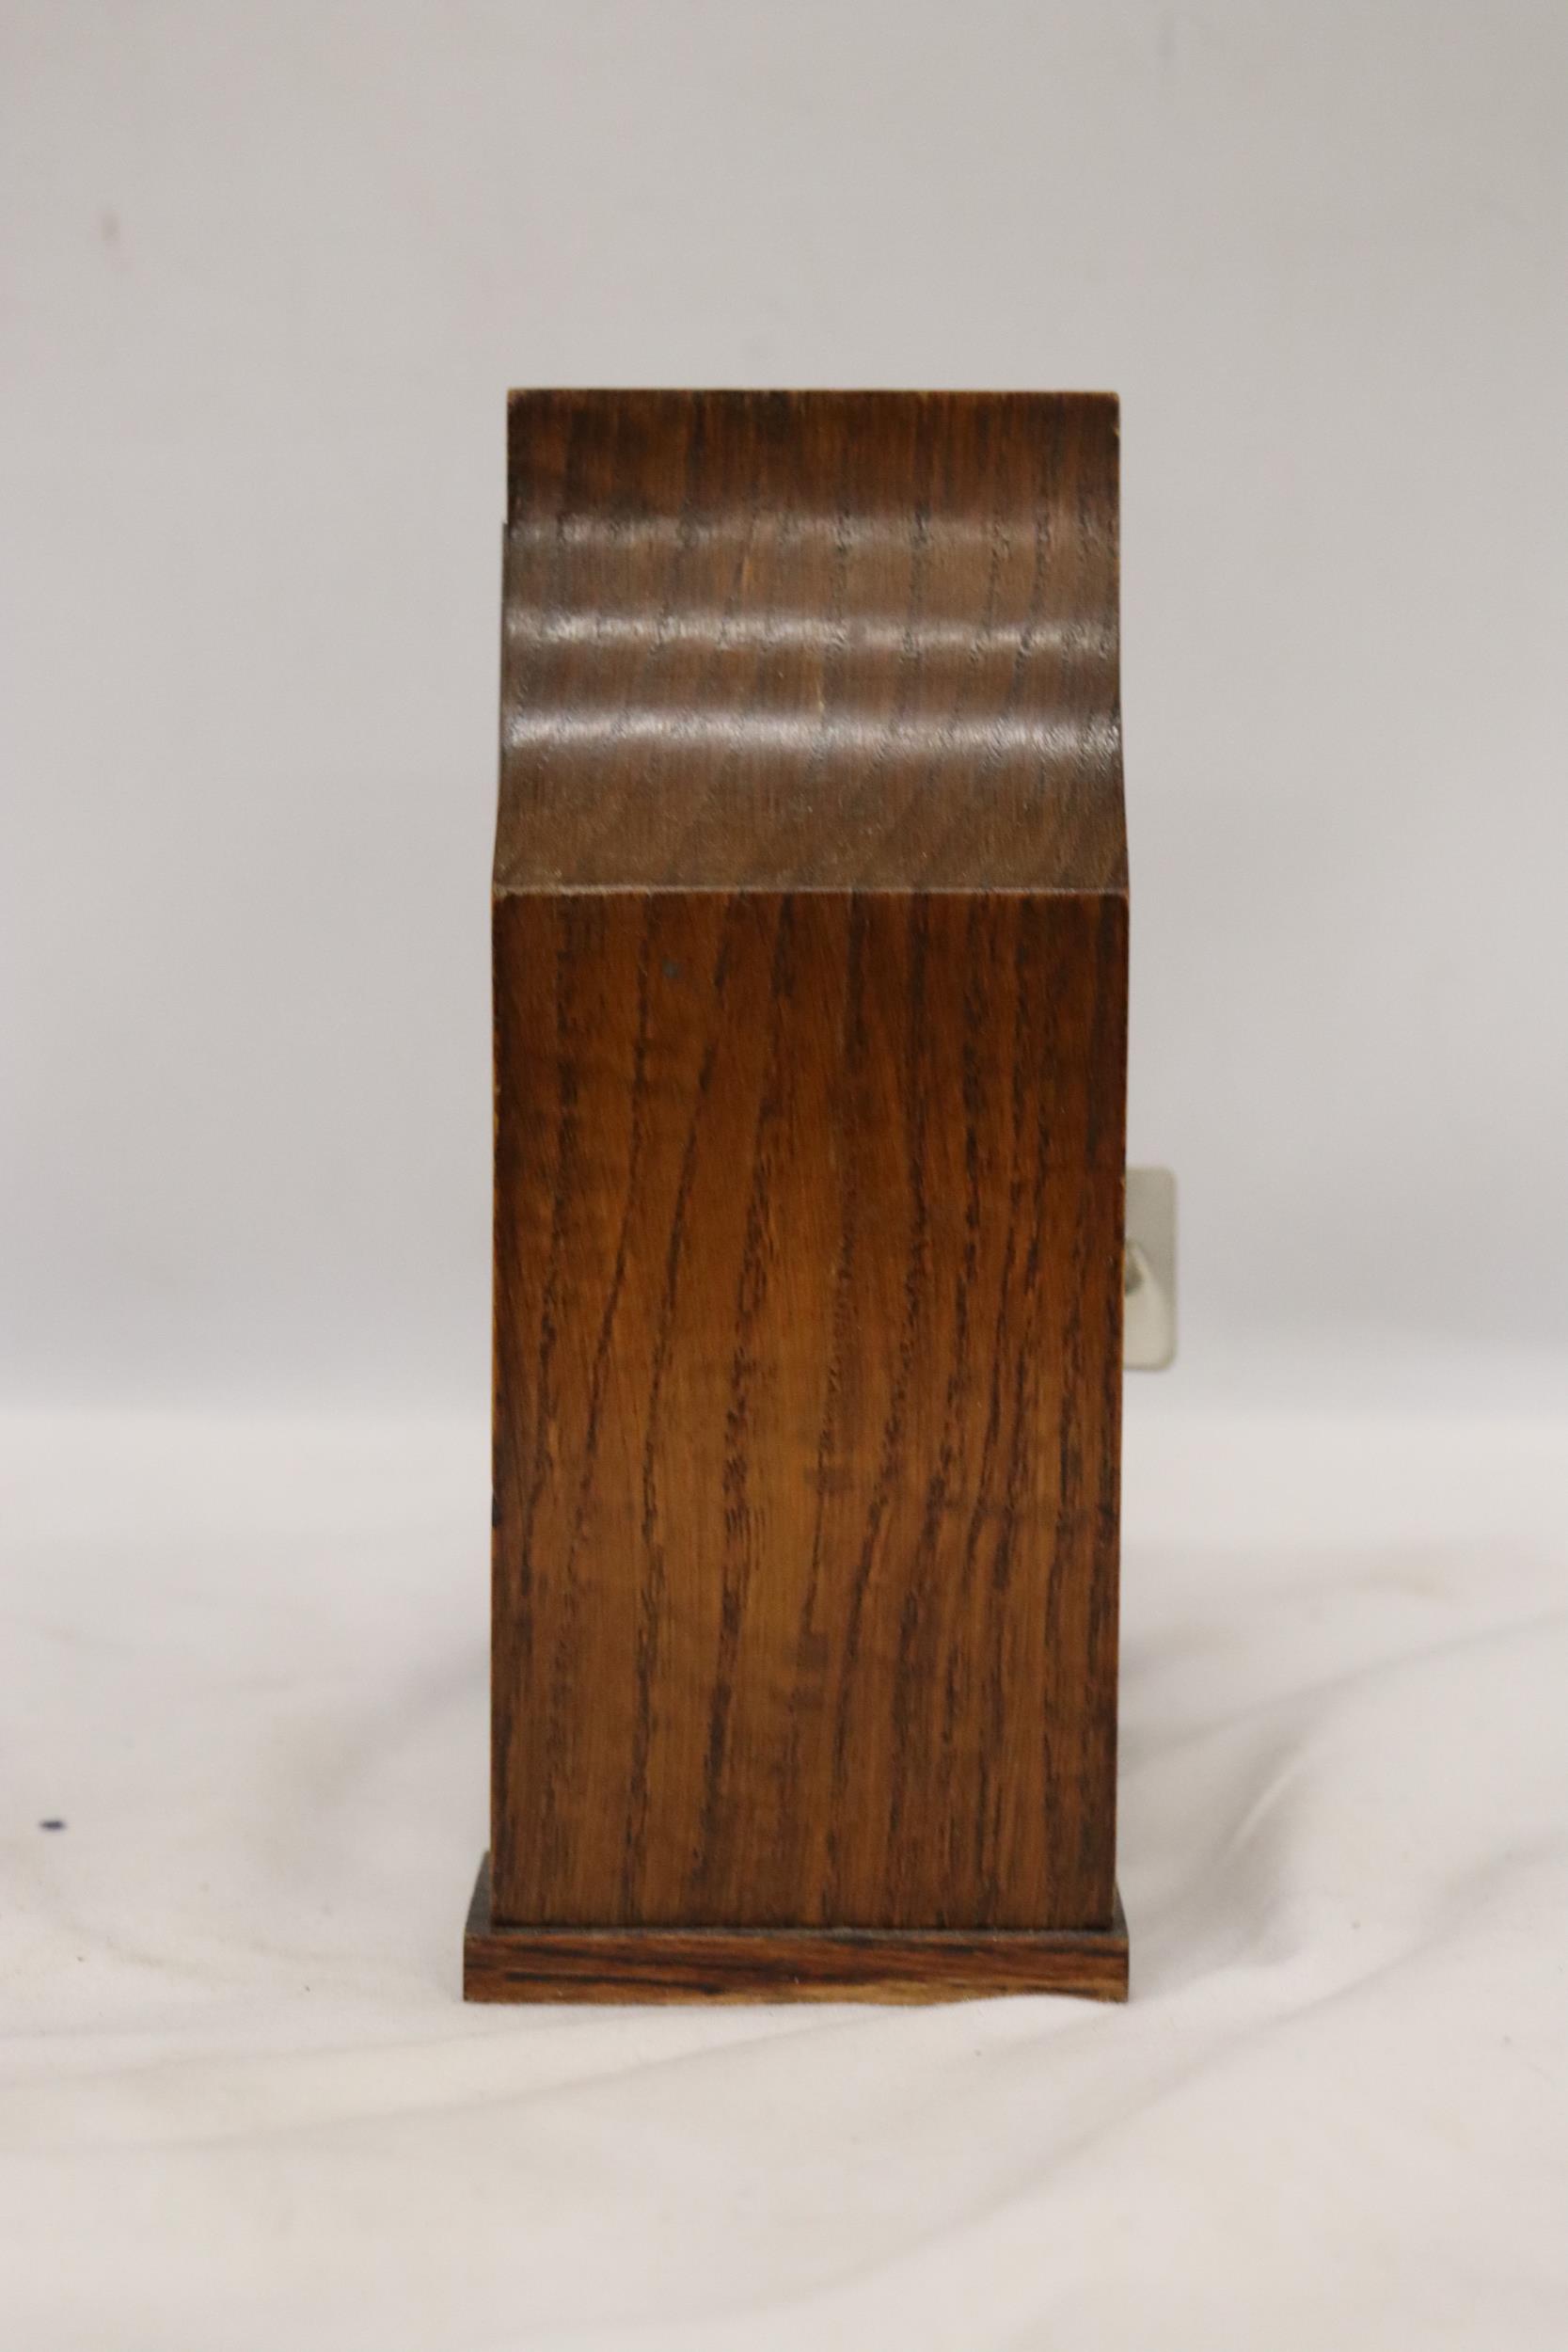 A DECO STYLE OAK 8 DAY MANTLE CLOCK WITH WIND UP MECHANISM SEEN WORKING BUT NO WARRANTY - Image 4 of 6